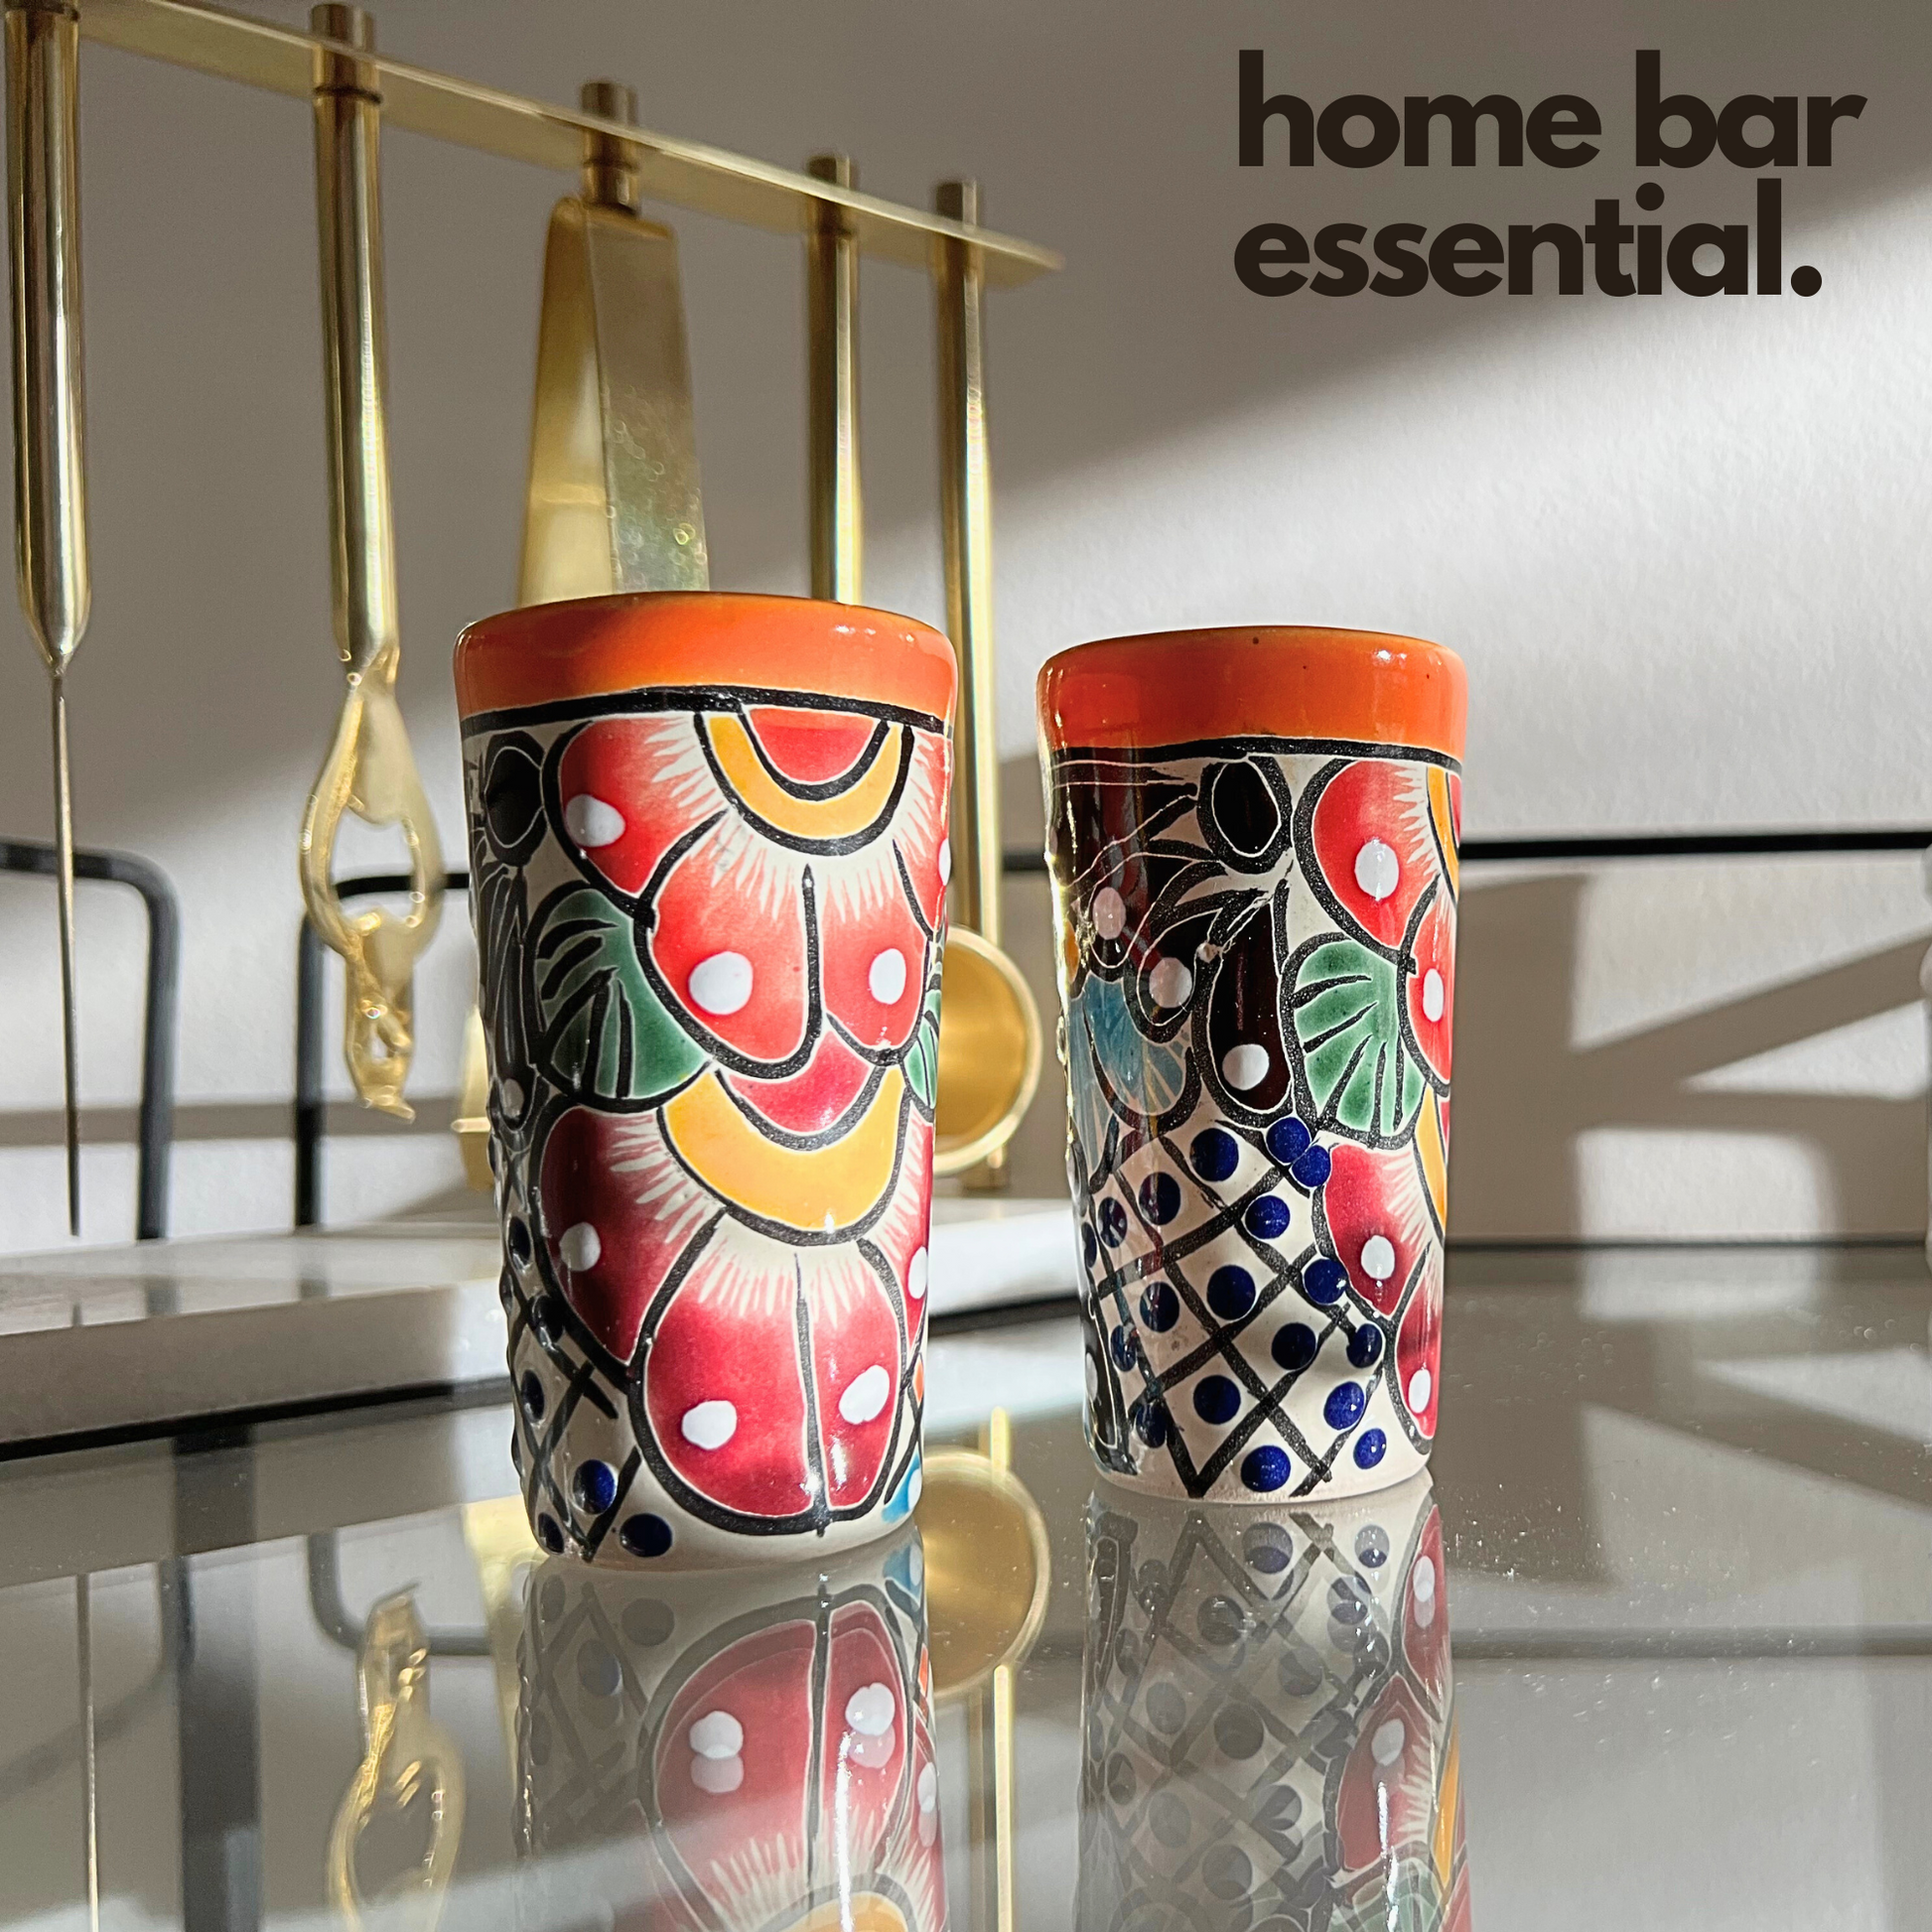 Set of four colorful hand-painted Mexican shot glasses, perfect for tequila or mezcal.